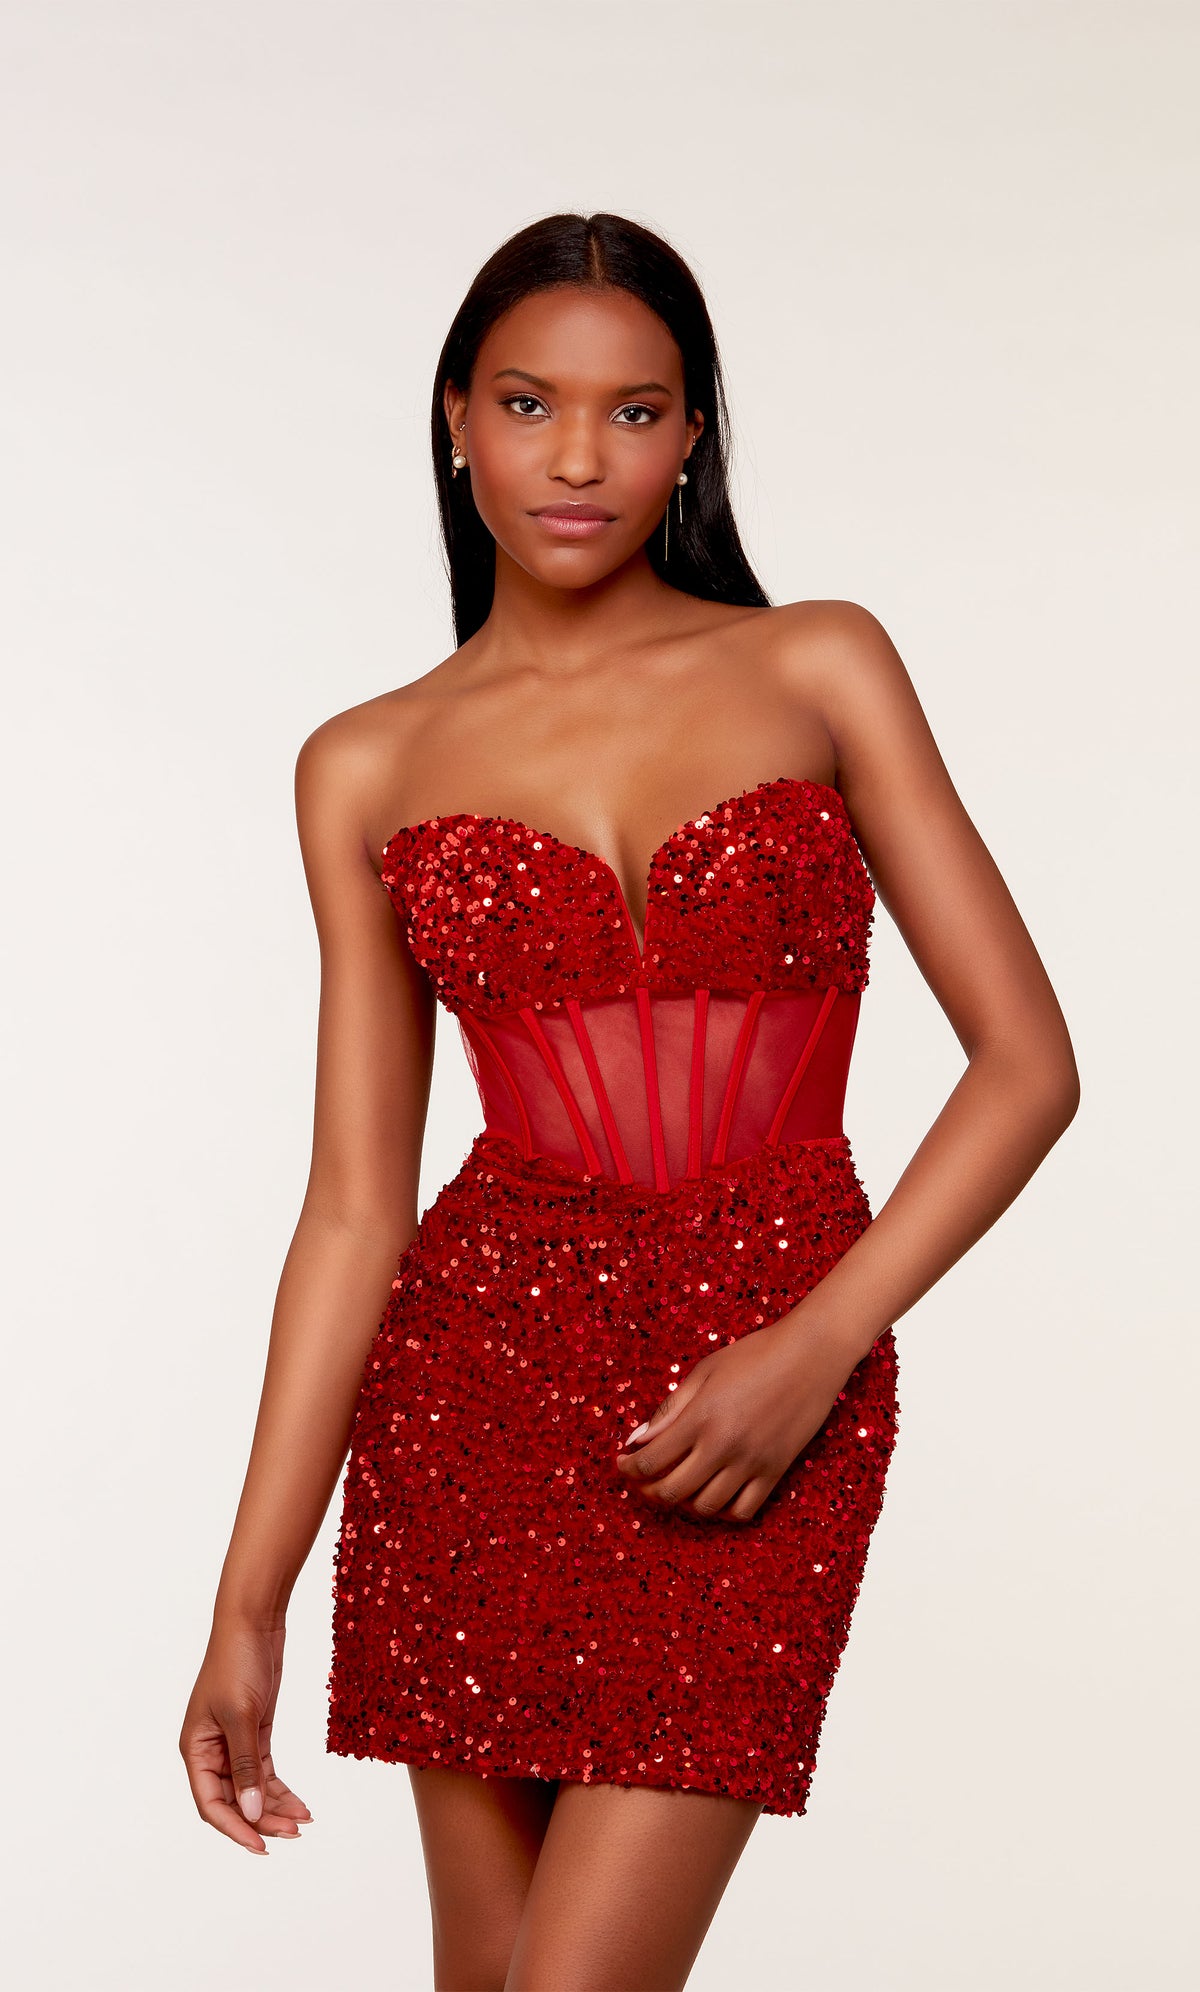 A glamorous corset top dress featuring a strapless sweetheart neckline and sheer bodice, in red plush sequins.